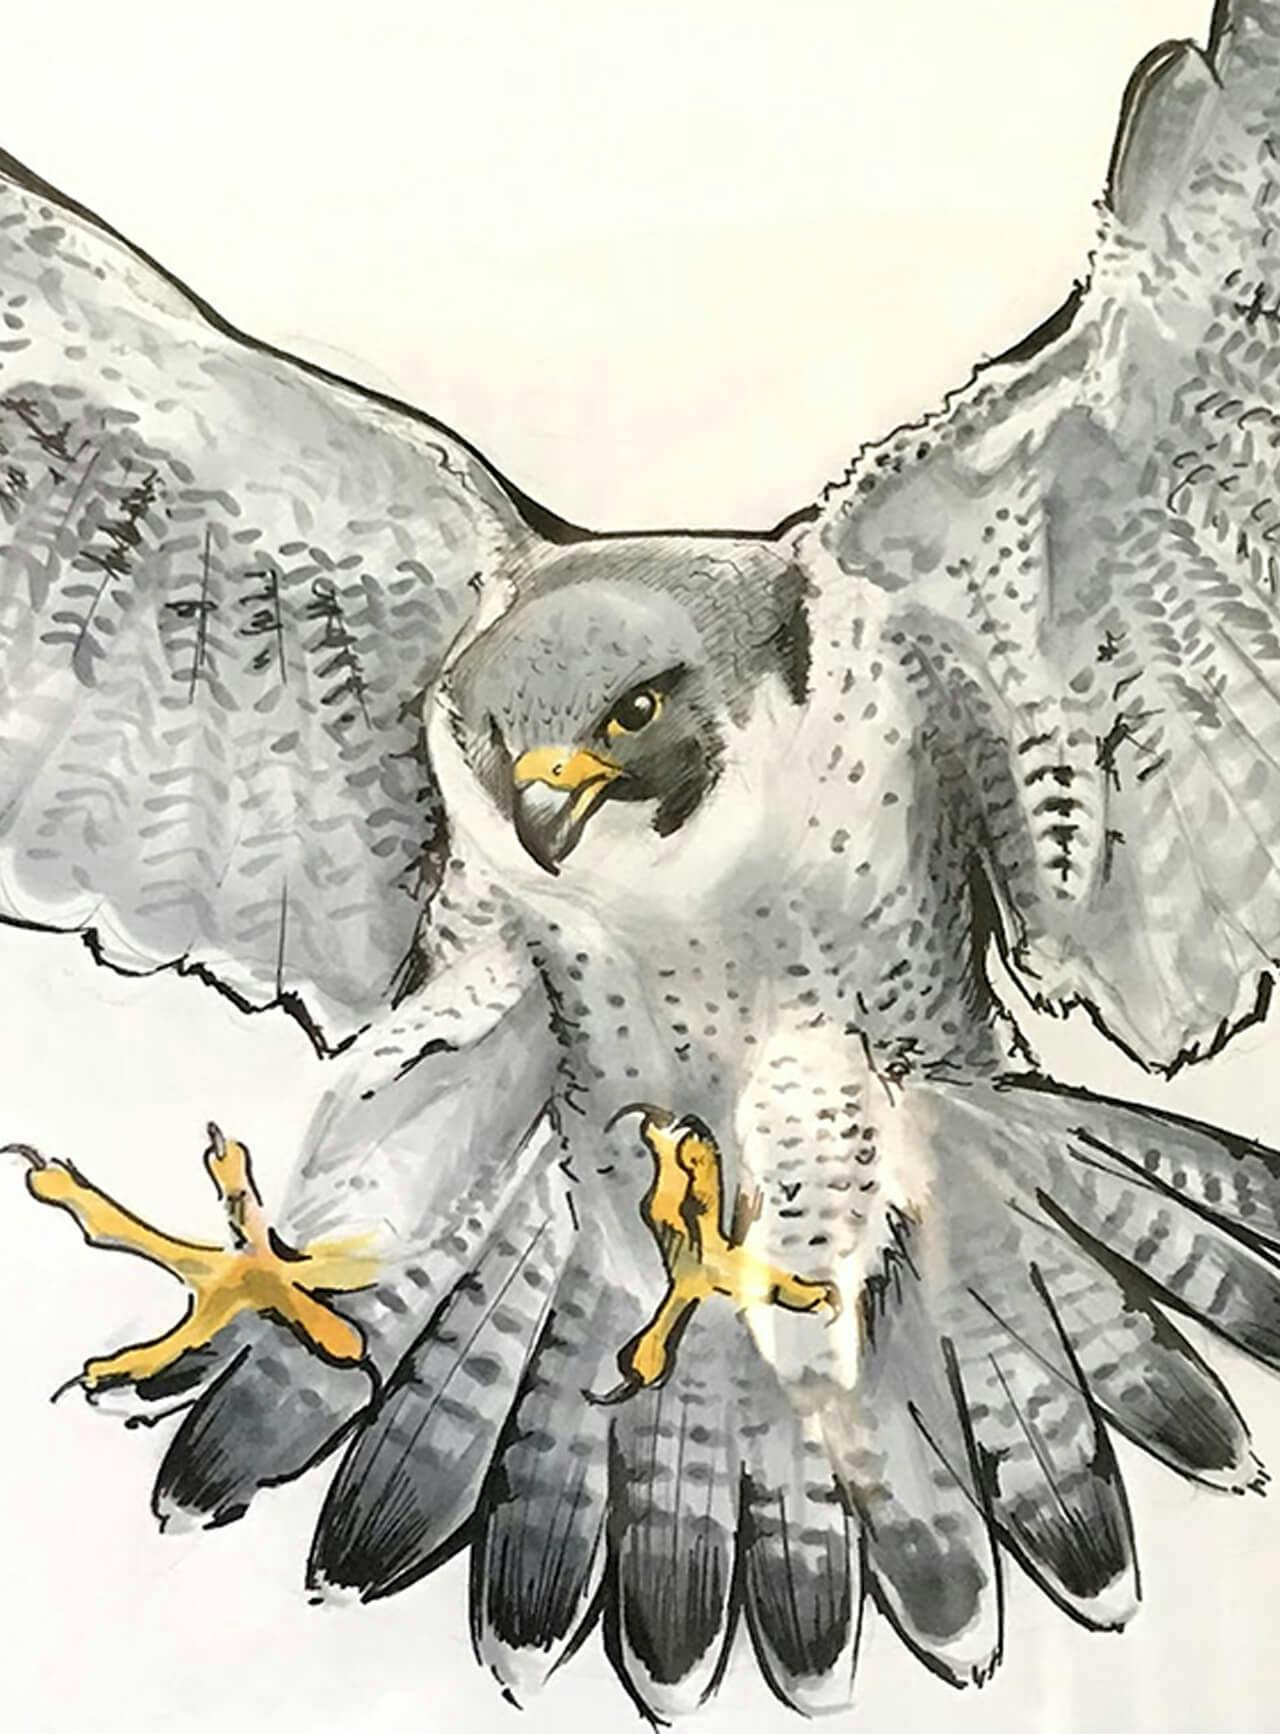 Ilustration of a Falcon with its talons up and wings spread